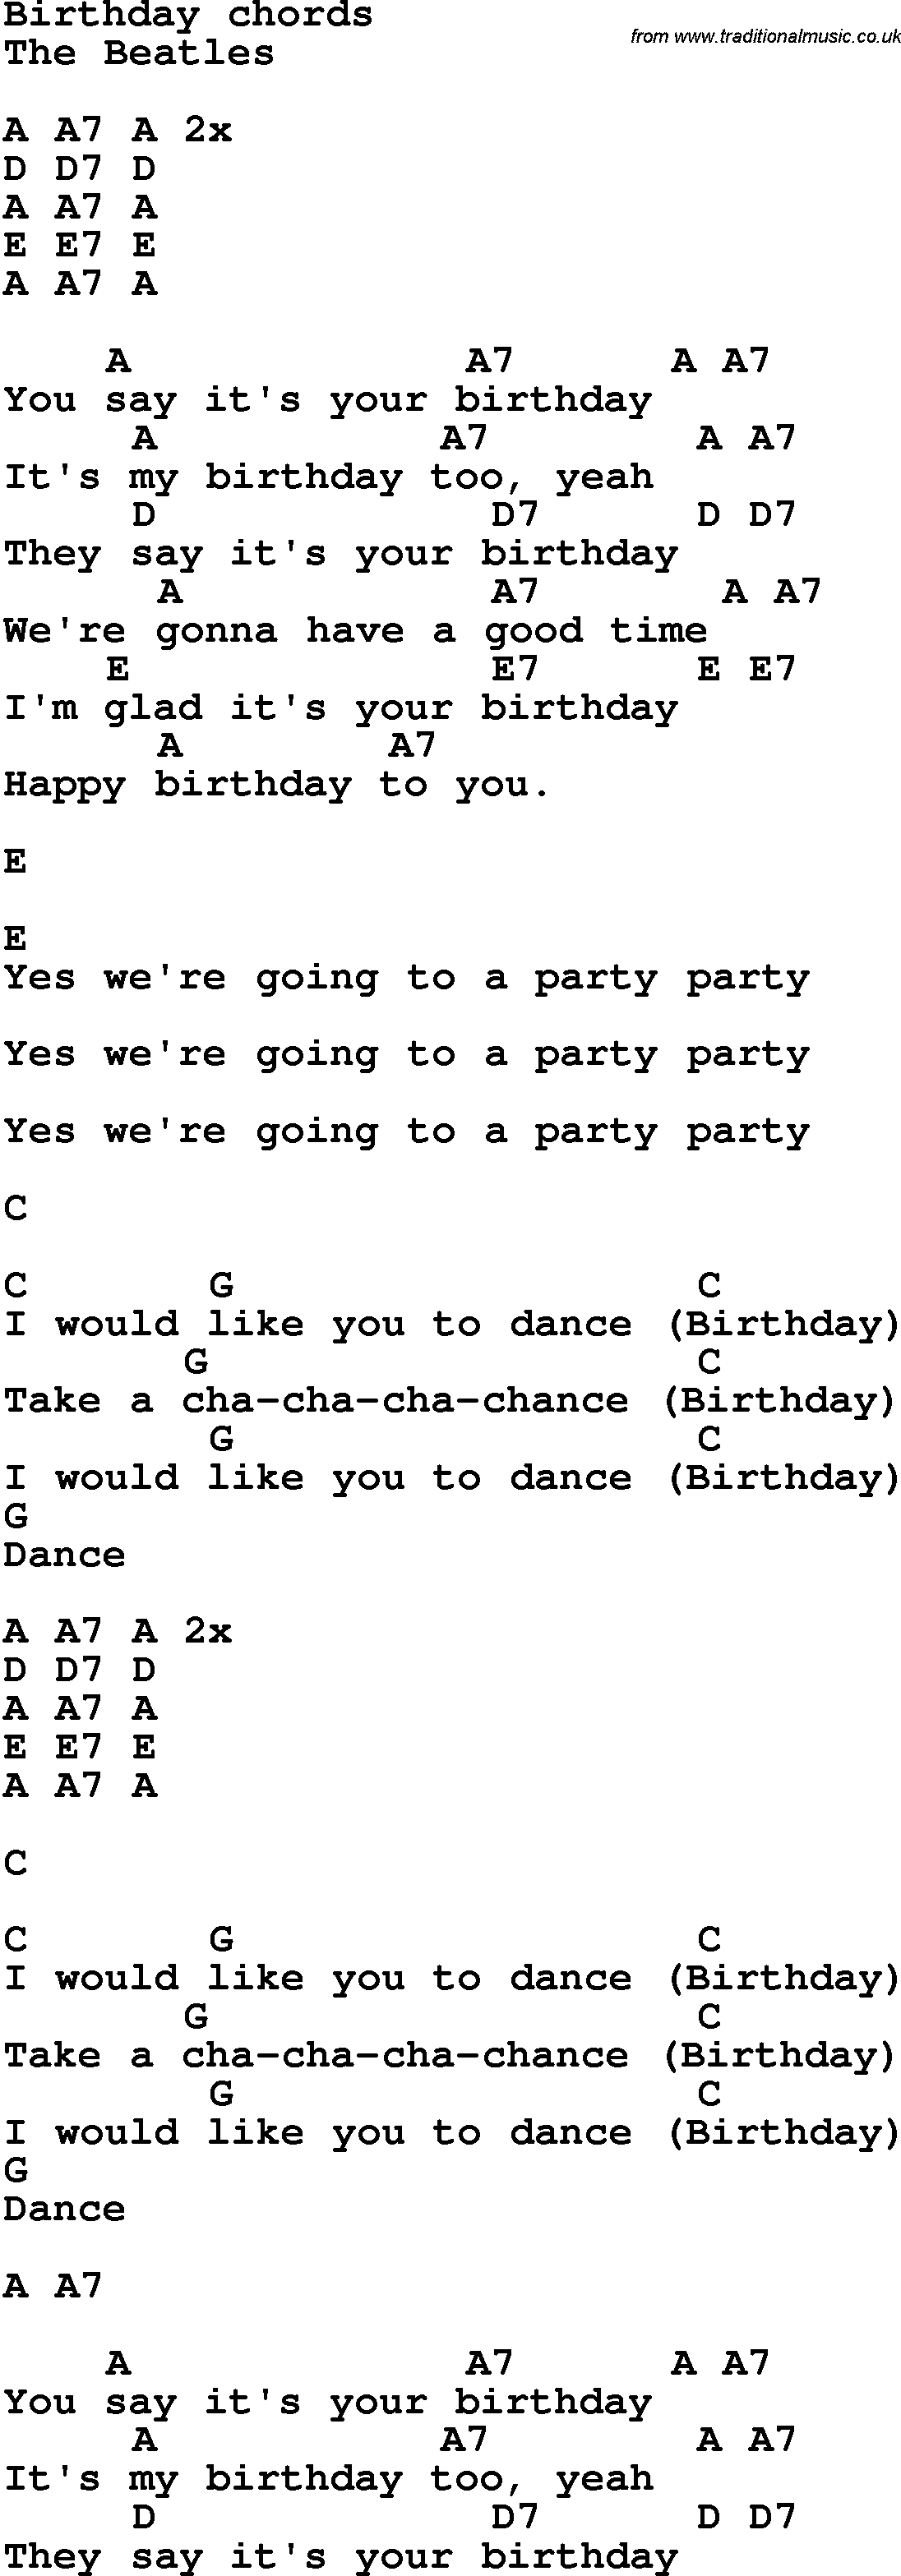 Song Lyrics with guitar chords for Birthday - The Beatles